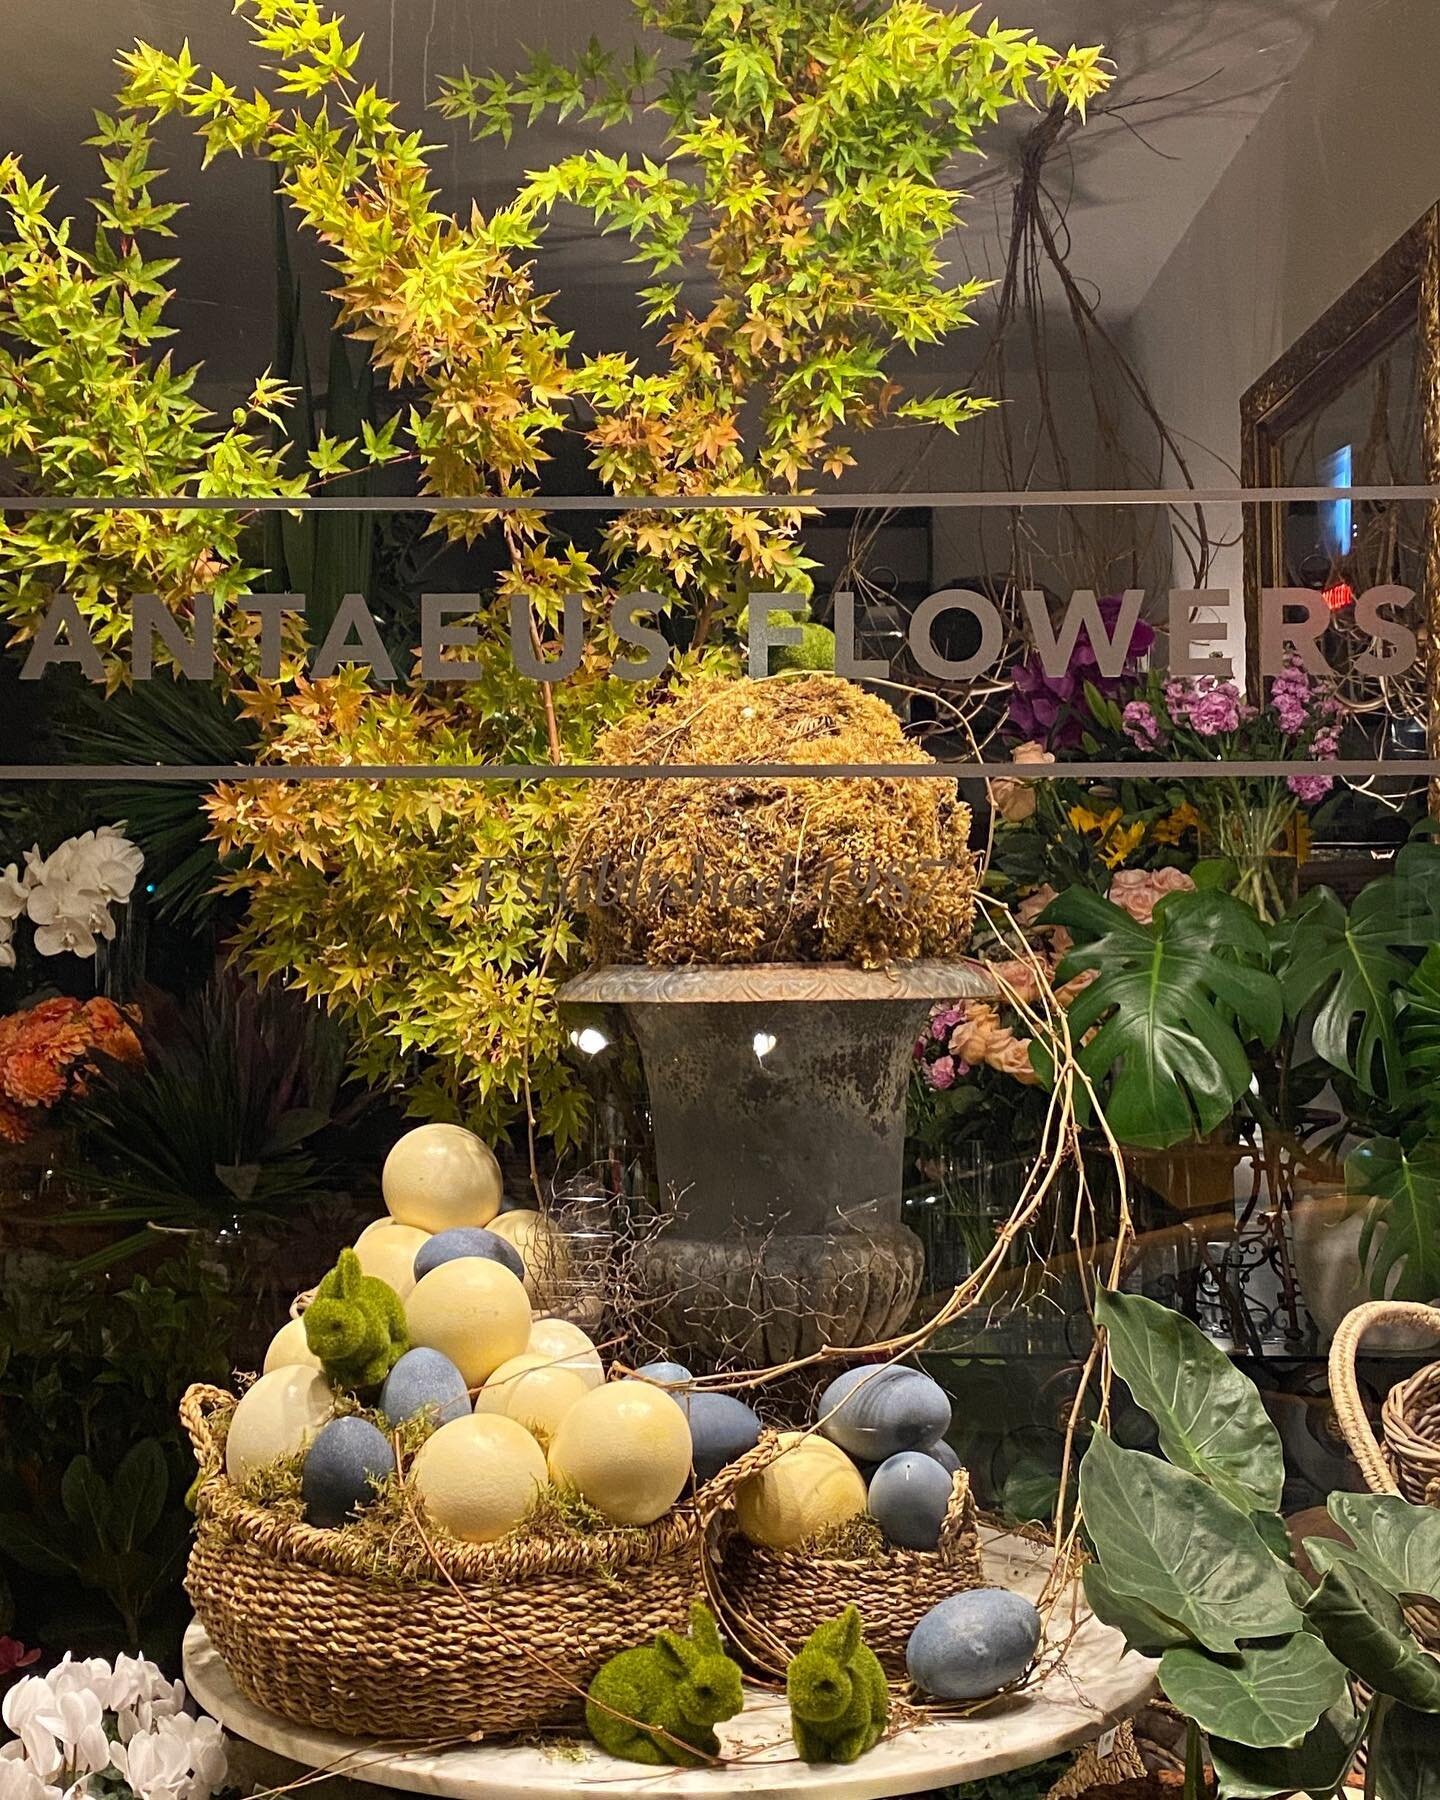 Have a lovely Easter weekend everyone! We will be back on Tuesday with fresh beautiful flowers as always.

#easterbunny #egghunt #toorakroadsouthyarra #luxuryflorist #melbourne